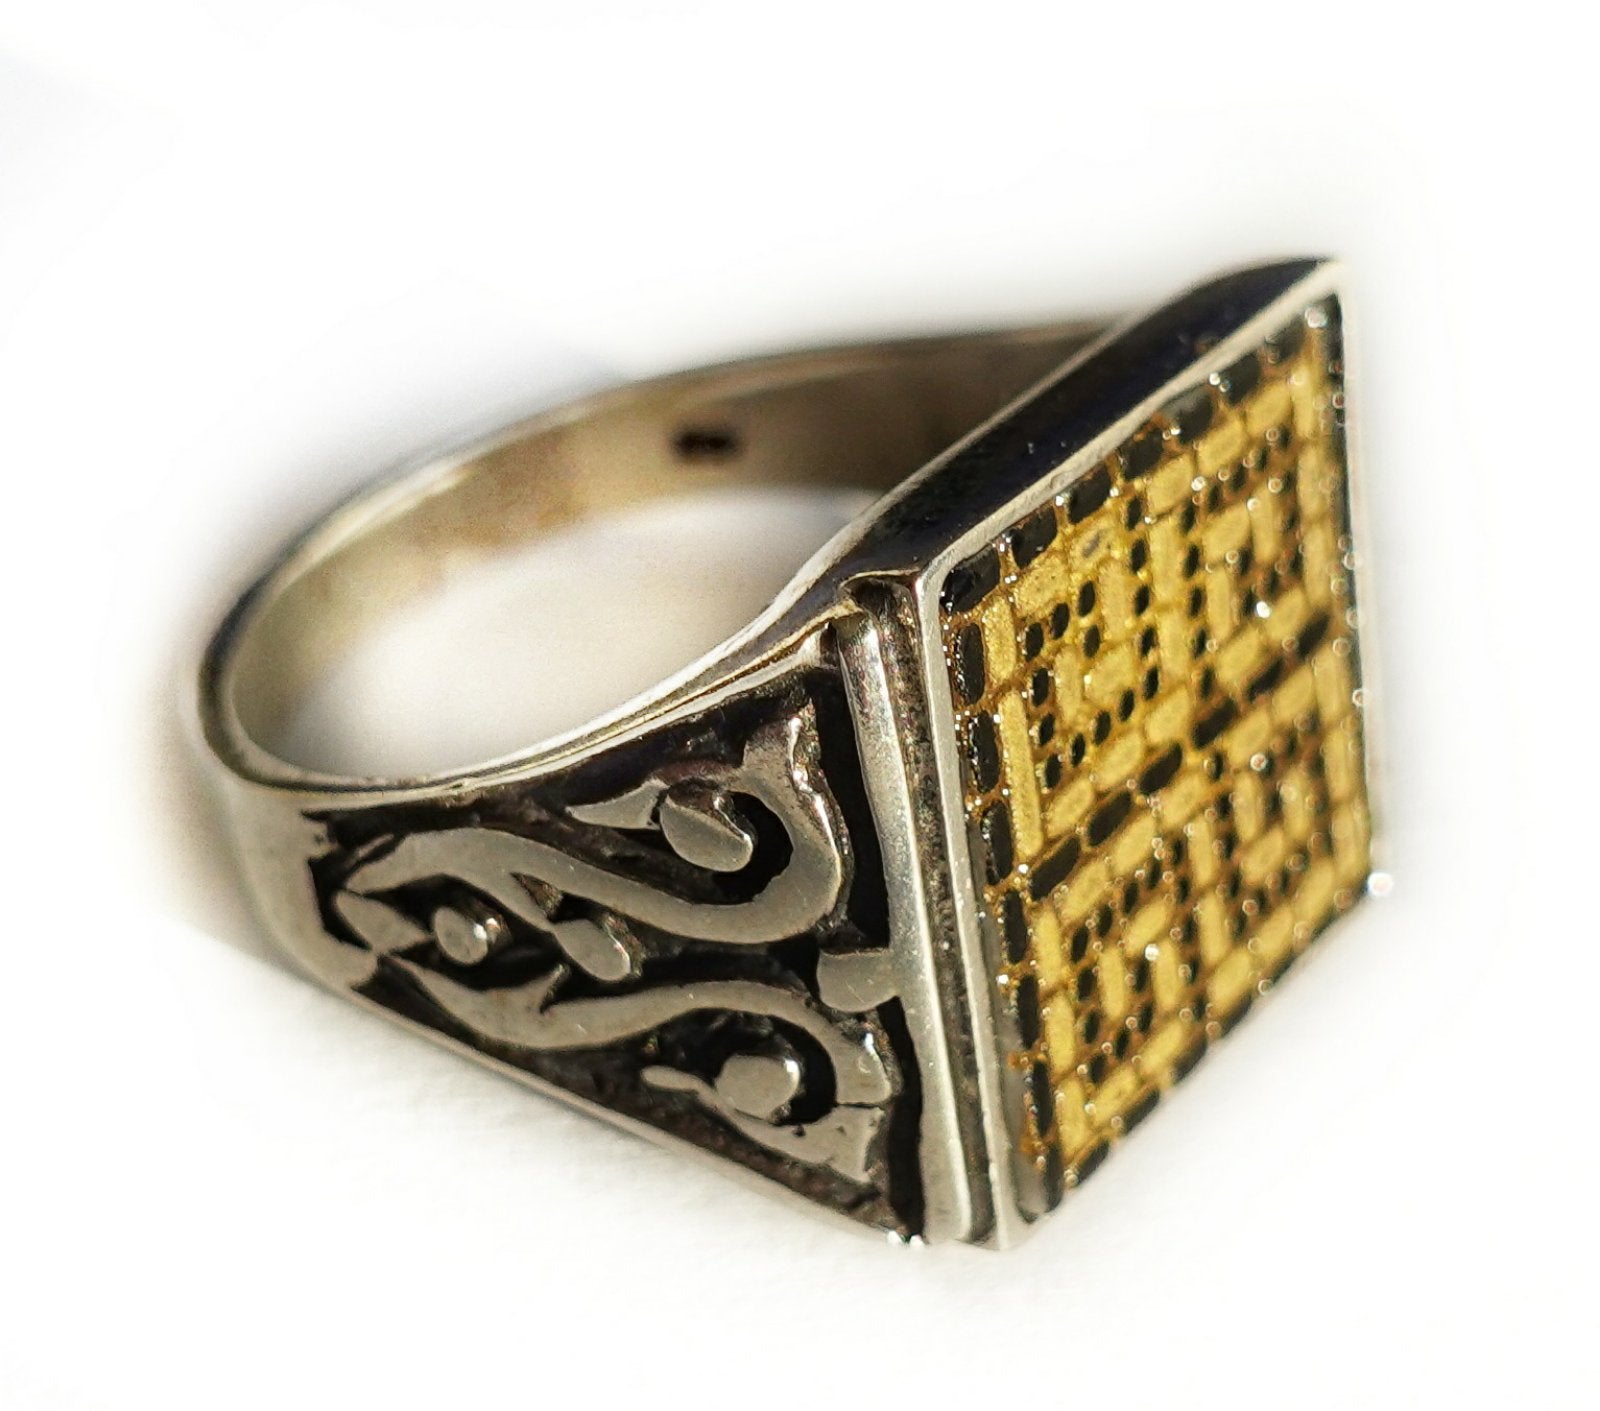 Meander ( meandros ) micro mosaic ring in solid silver 925 double rhodium plated